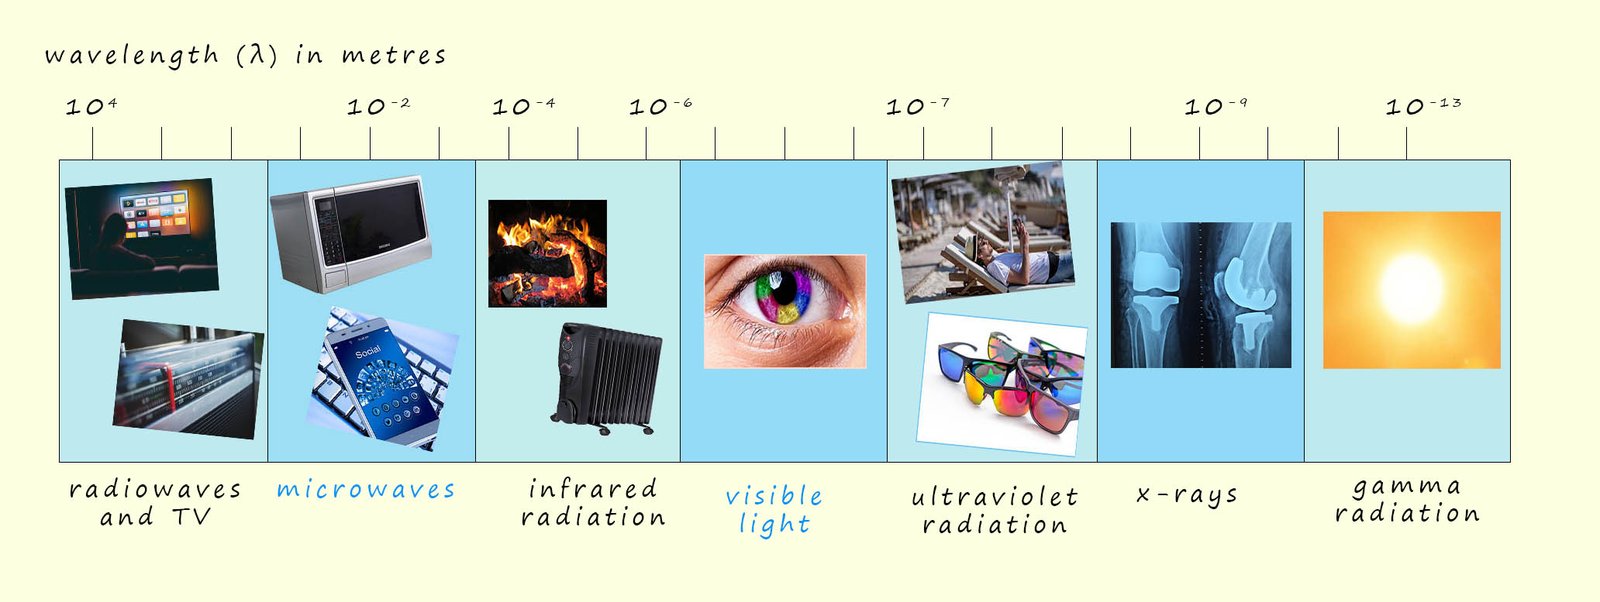 The continuous electromagnetic spectrum from radiowaves to gamma rays